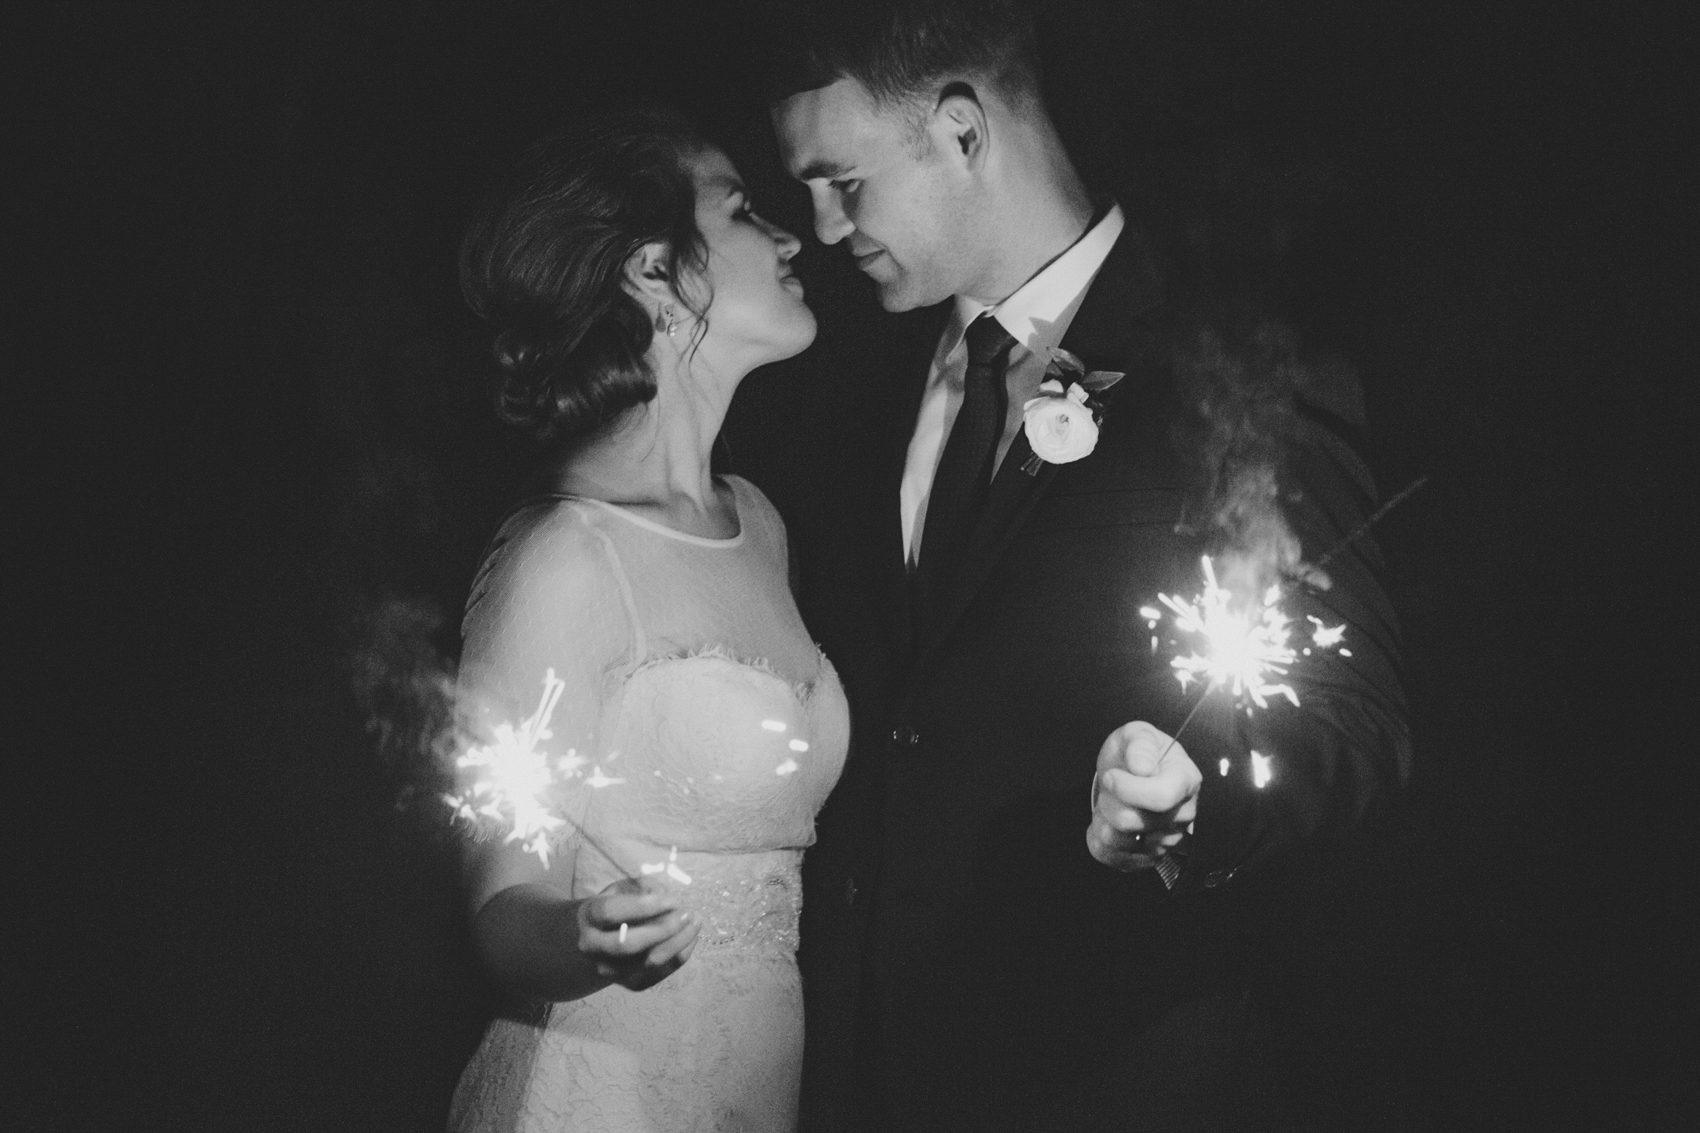 Orlando wedding photography at an outdoor garden with romantic black and white sparkler photo at the end of the reception